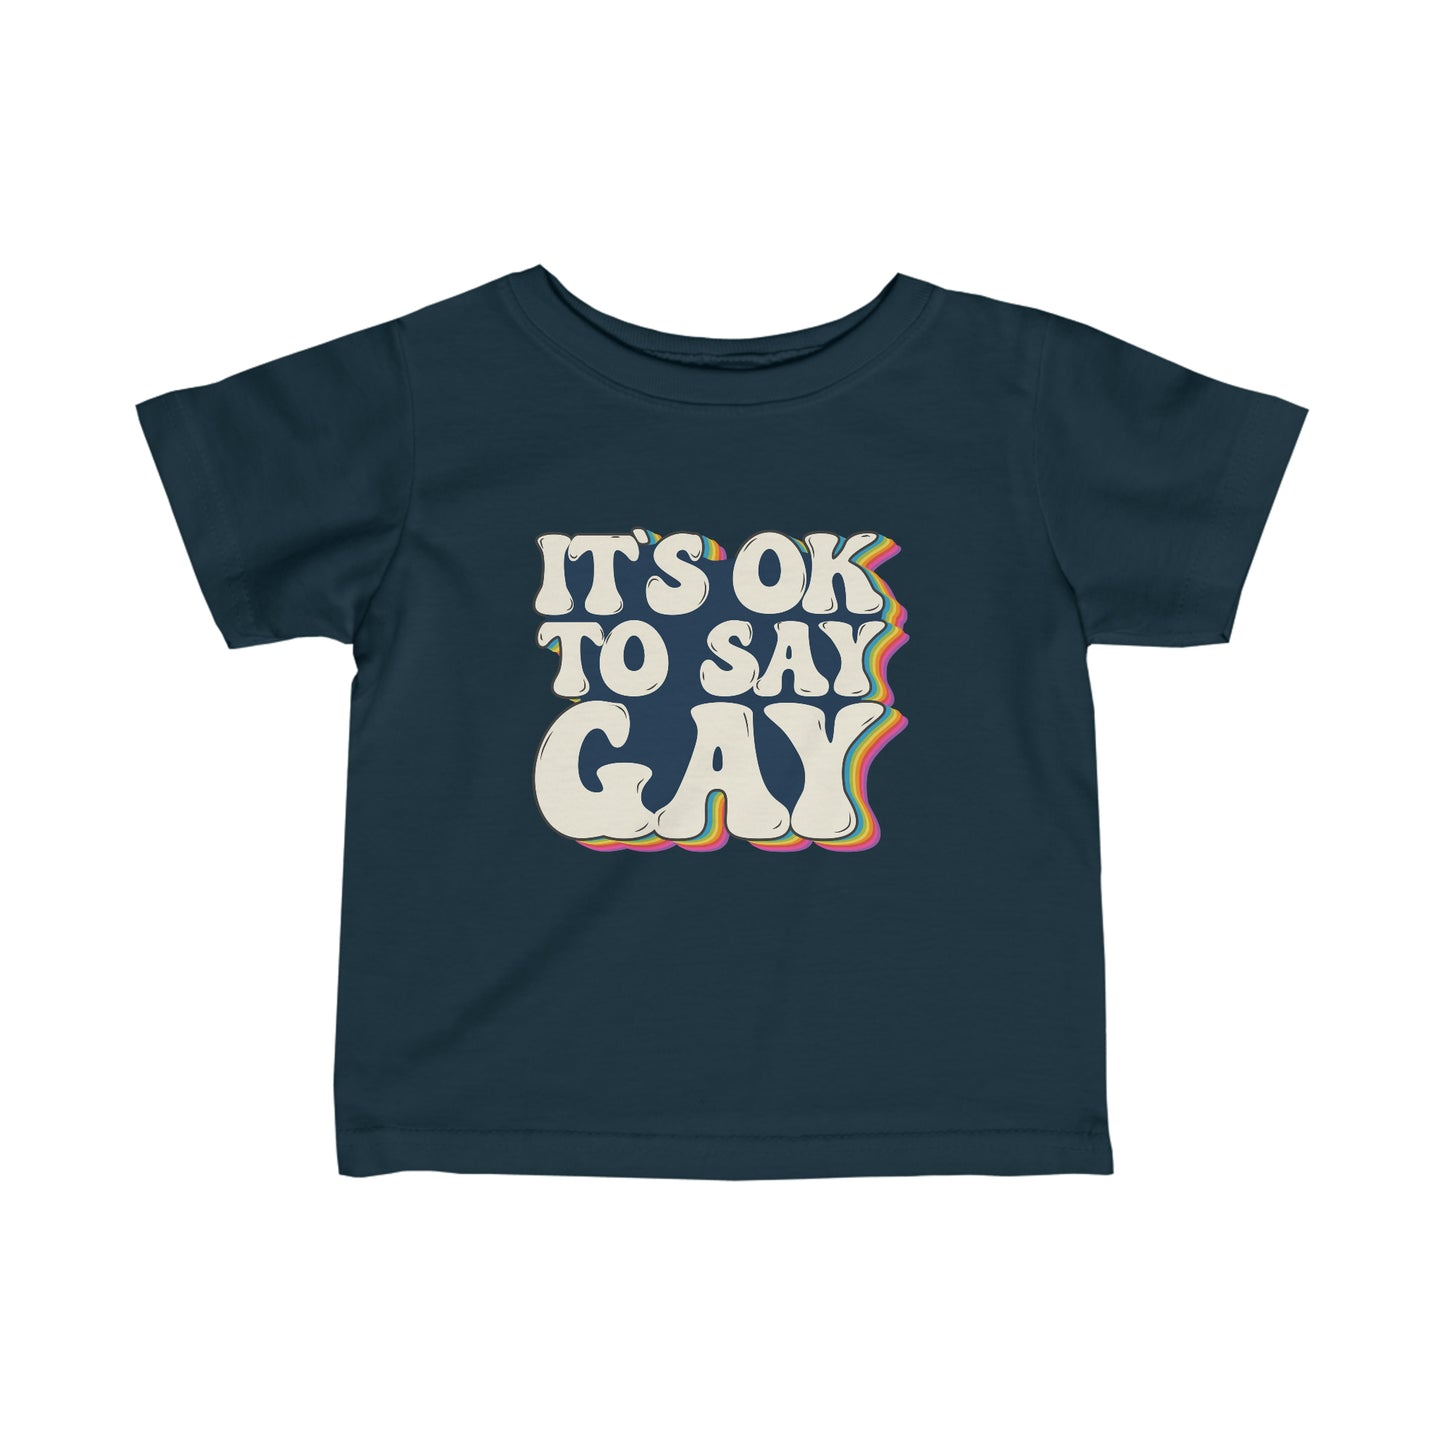 “It’s OK to Say Gay” Infant Tee